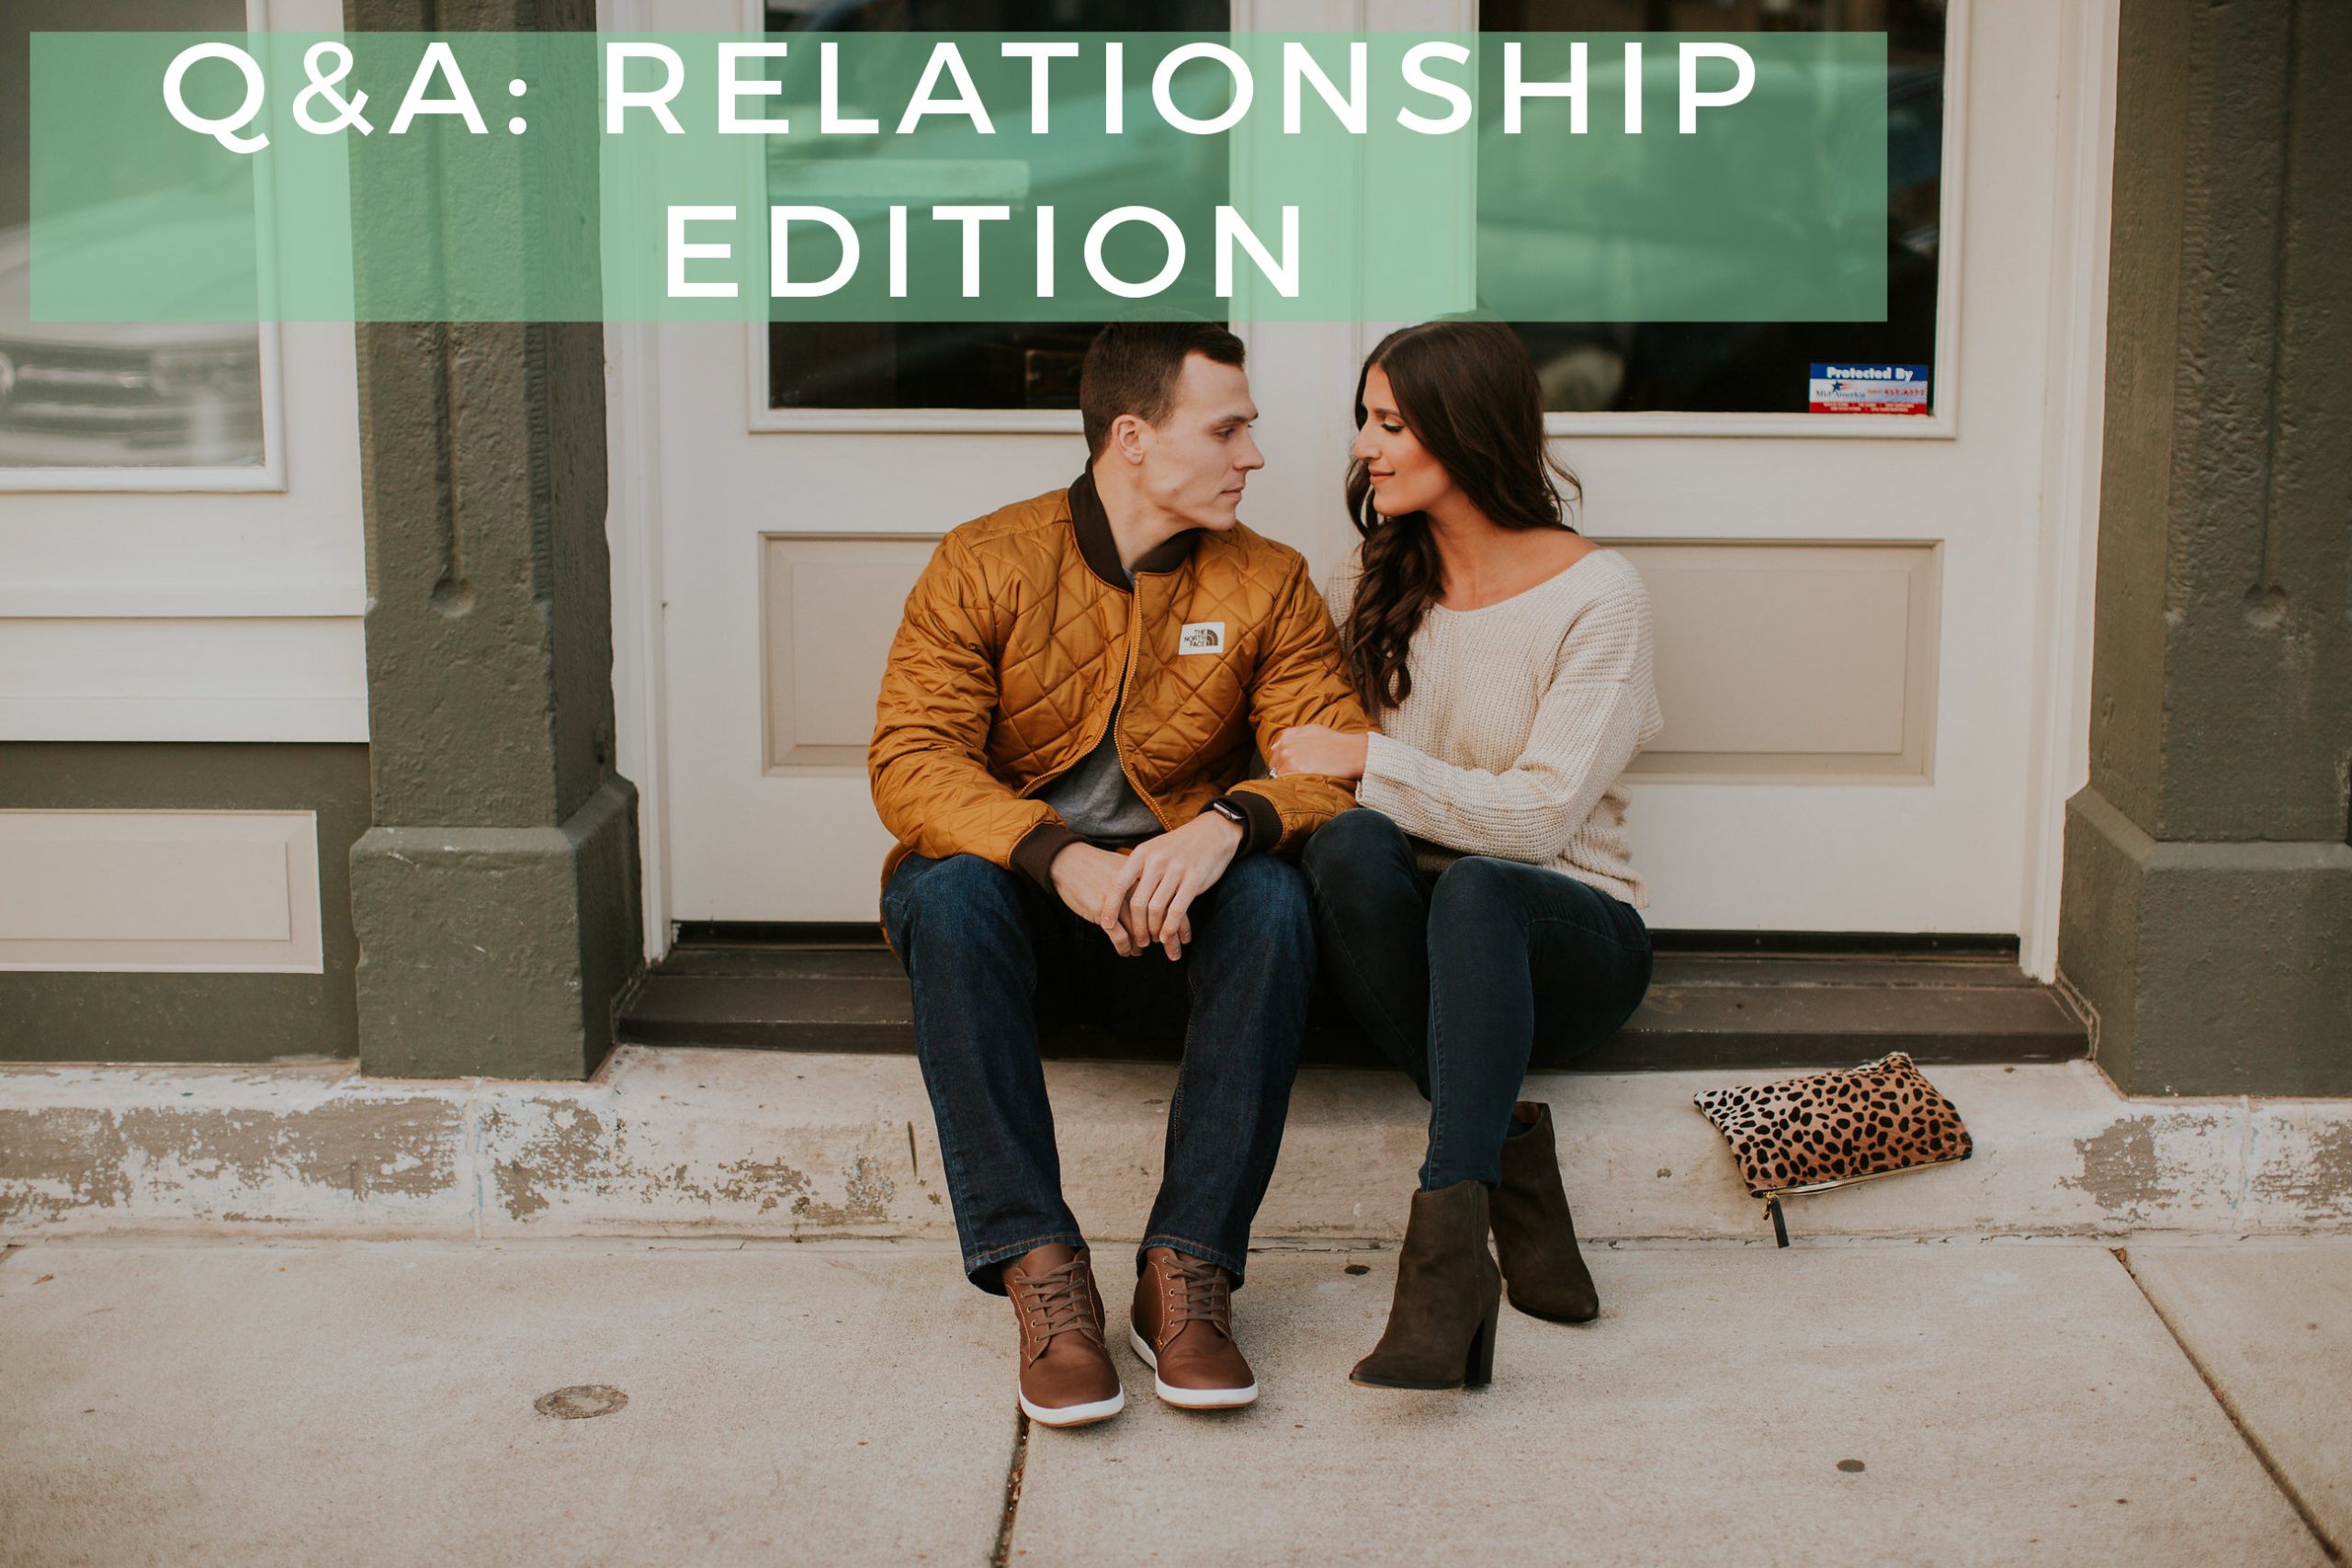 questions and answers relationship edition, a southern drawl relationship advice, jordan white louisville, a southern drawl husband, a southern drawl fiance